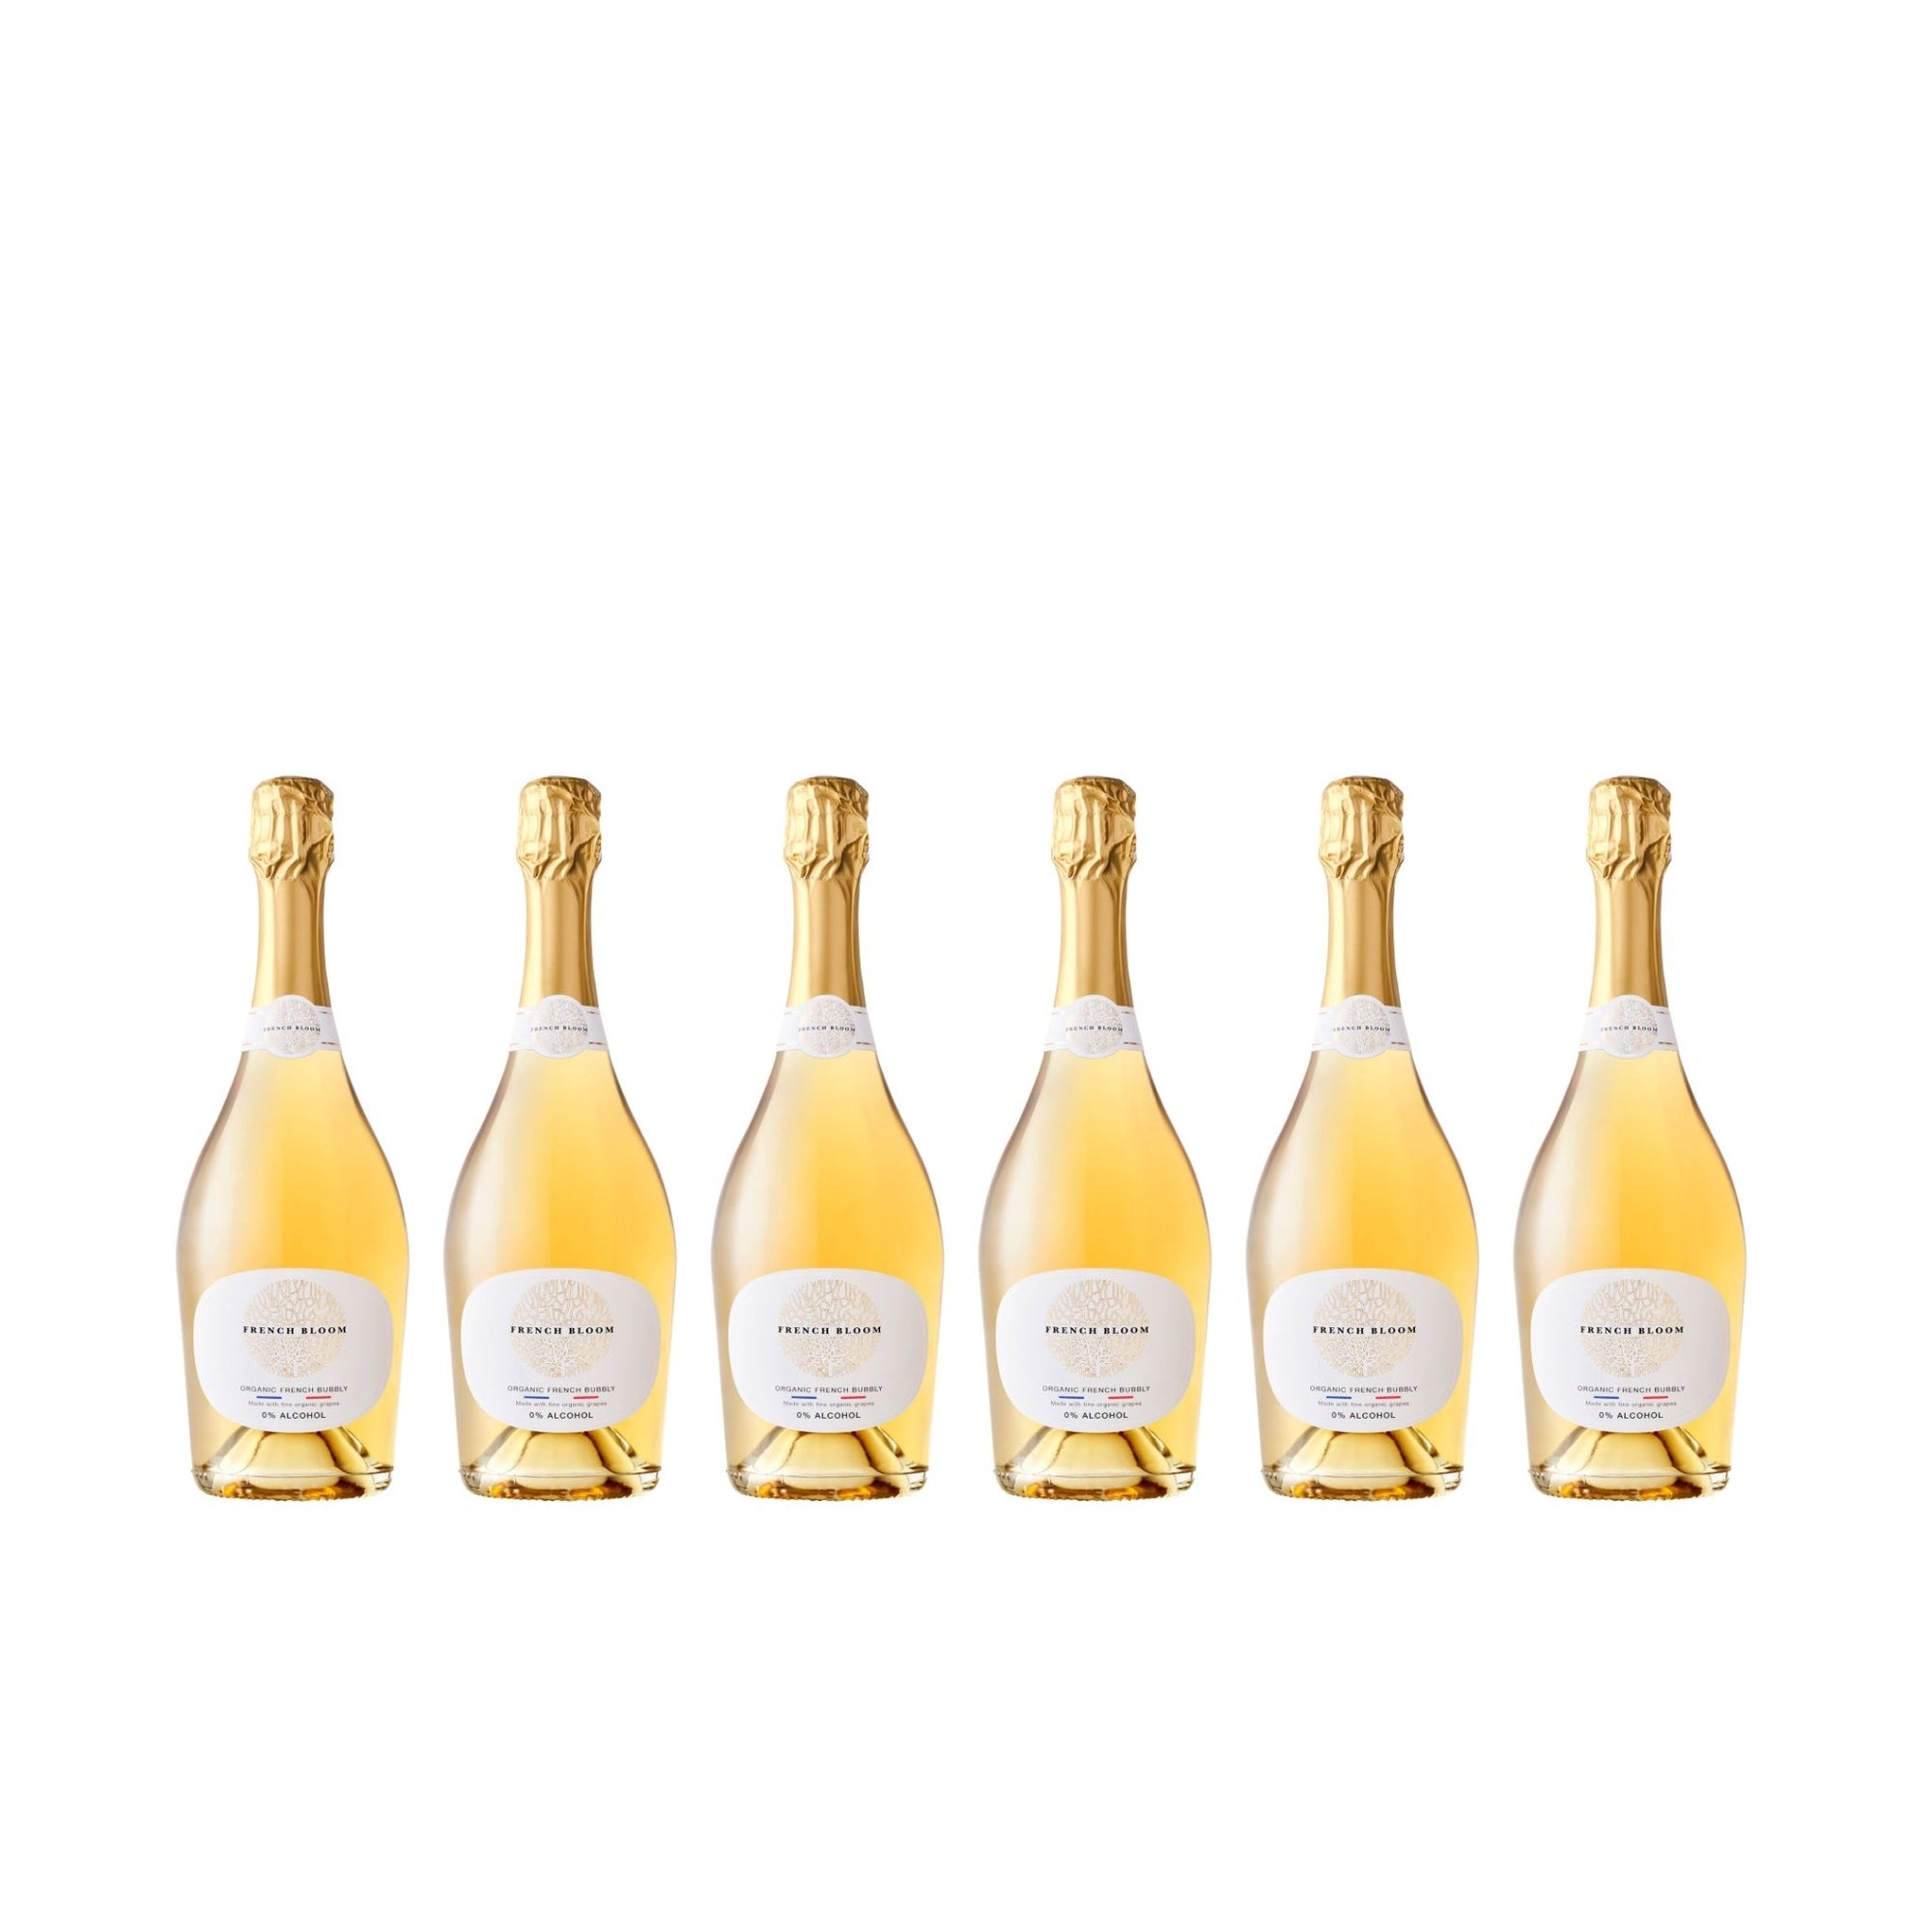 French Bloom Le Blanc Alcohol-Free Sparkling Wine - Boisson